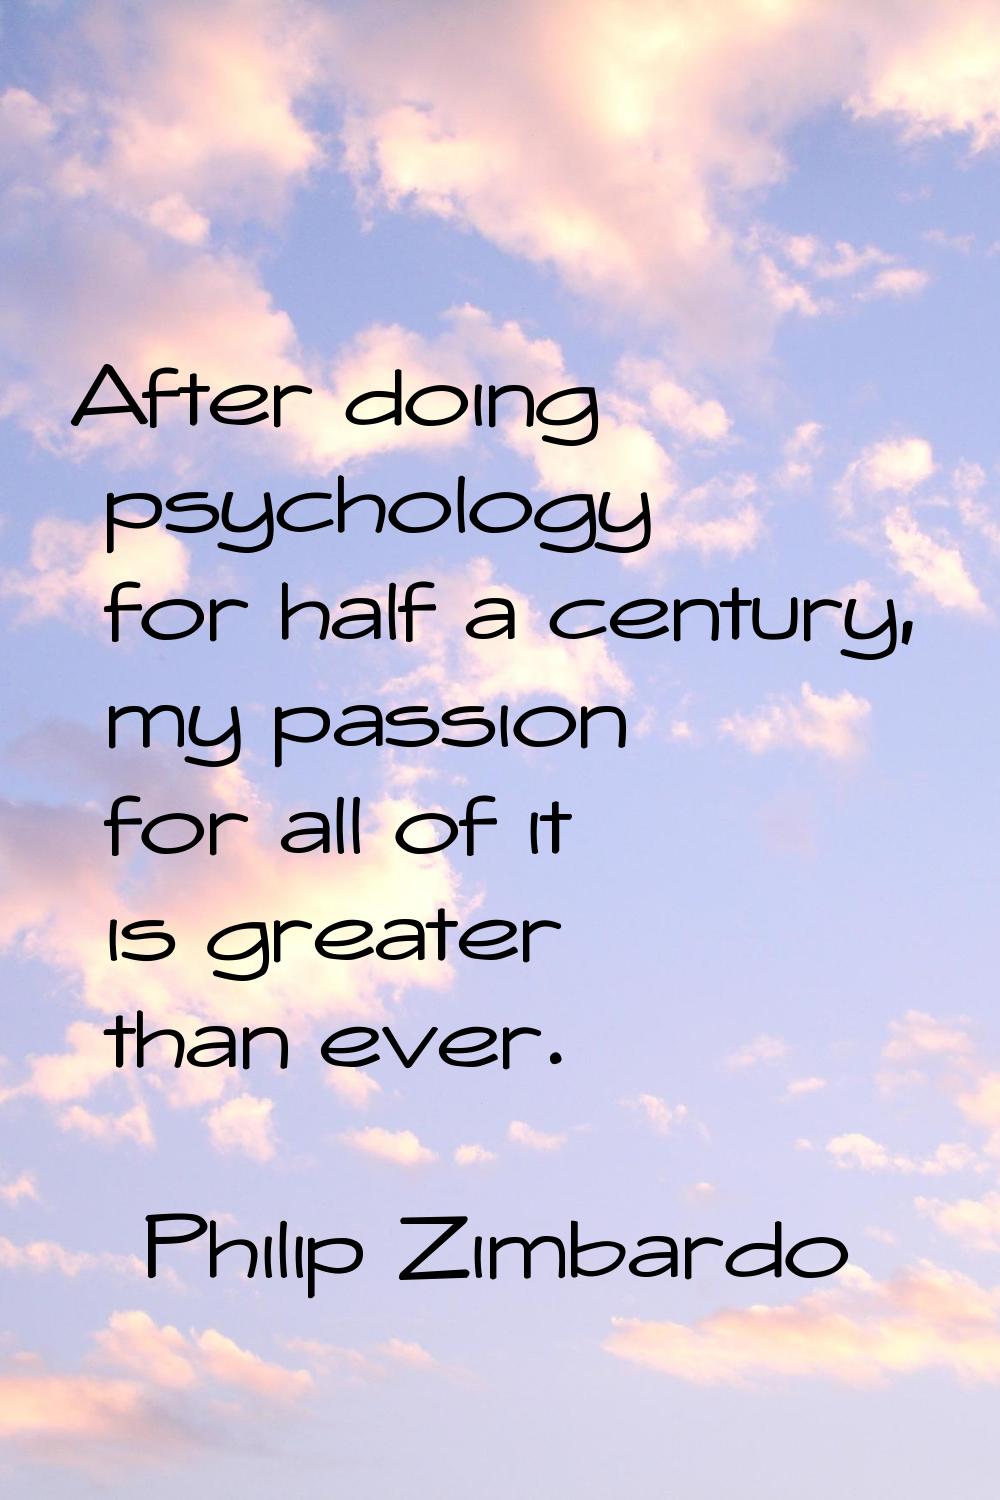 After doing psychology for half a century, my passion for all of it is greater than ever.